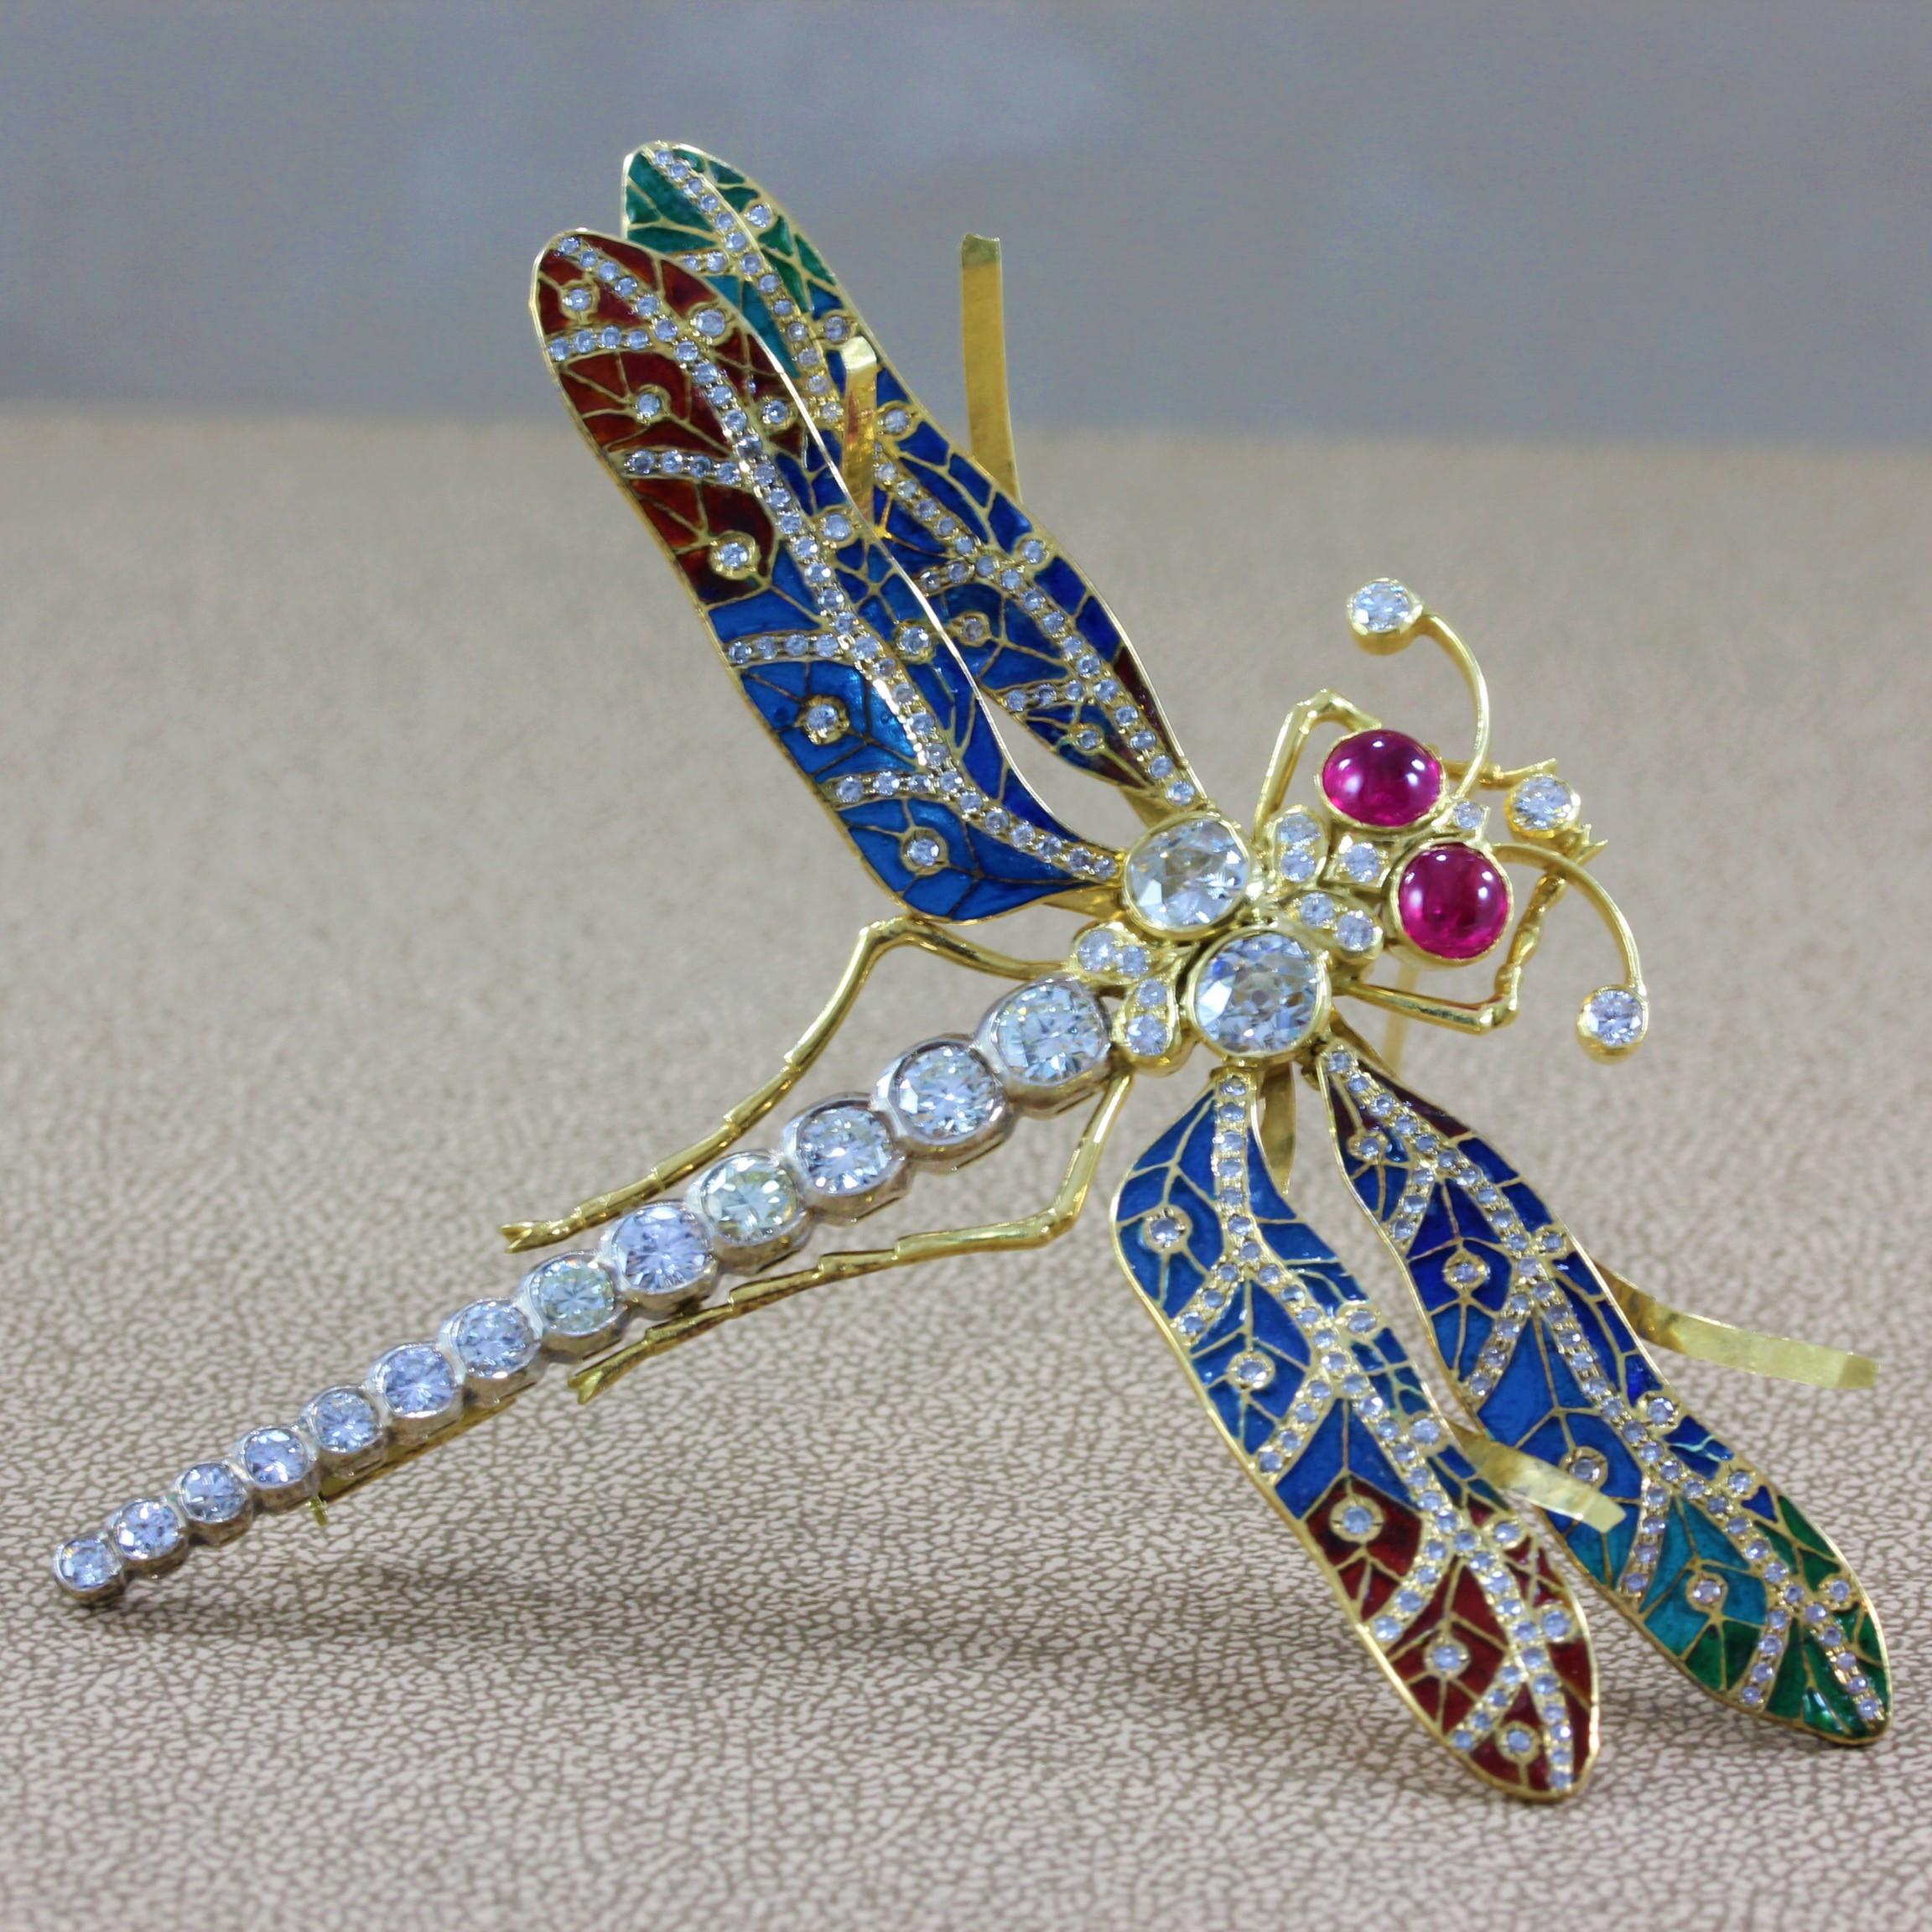 A magnificent example of fine quality plique-a-jour by an experienced master jeweler. Approximately 5 carats of diamond and 1.50 carats of ruby accent the intricately designed brooch. The wings of the dragonfly are filled with vivid red, green and